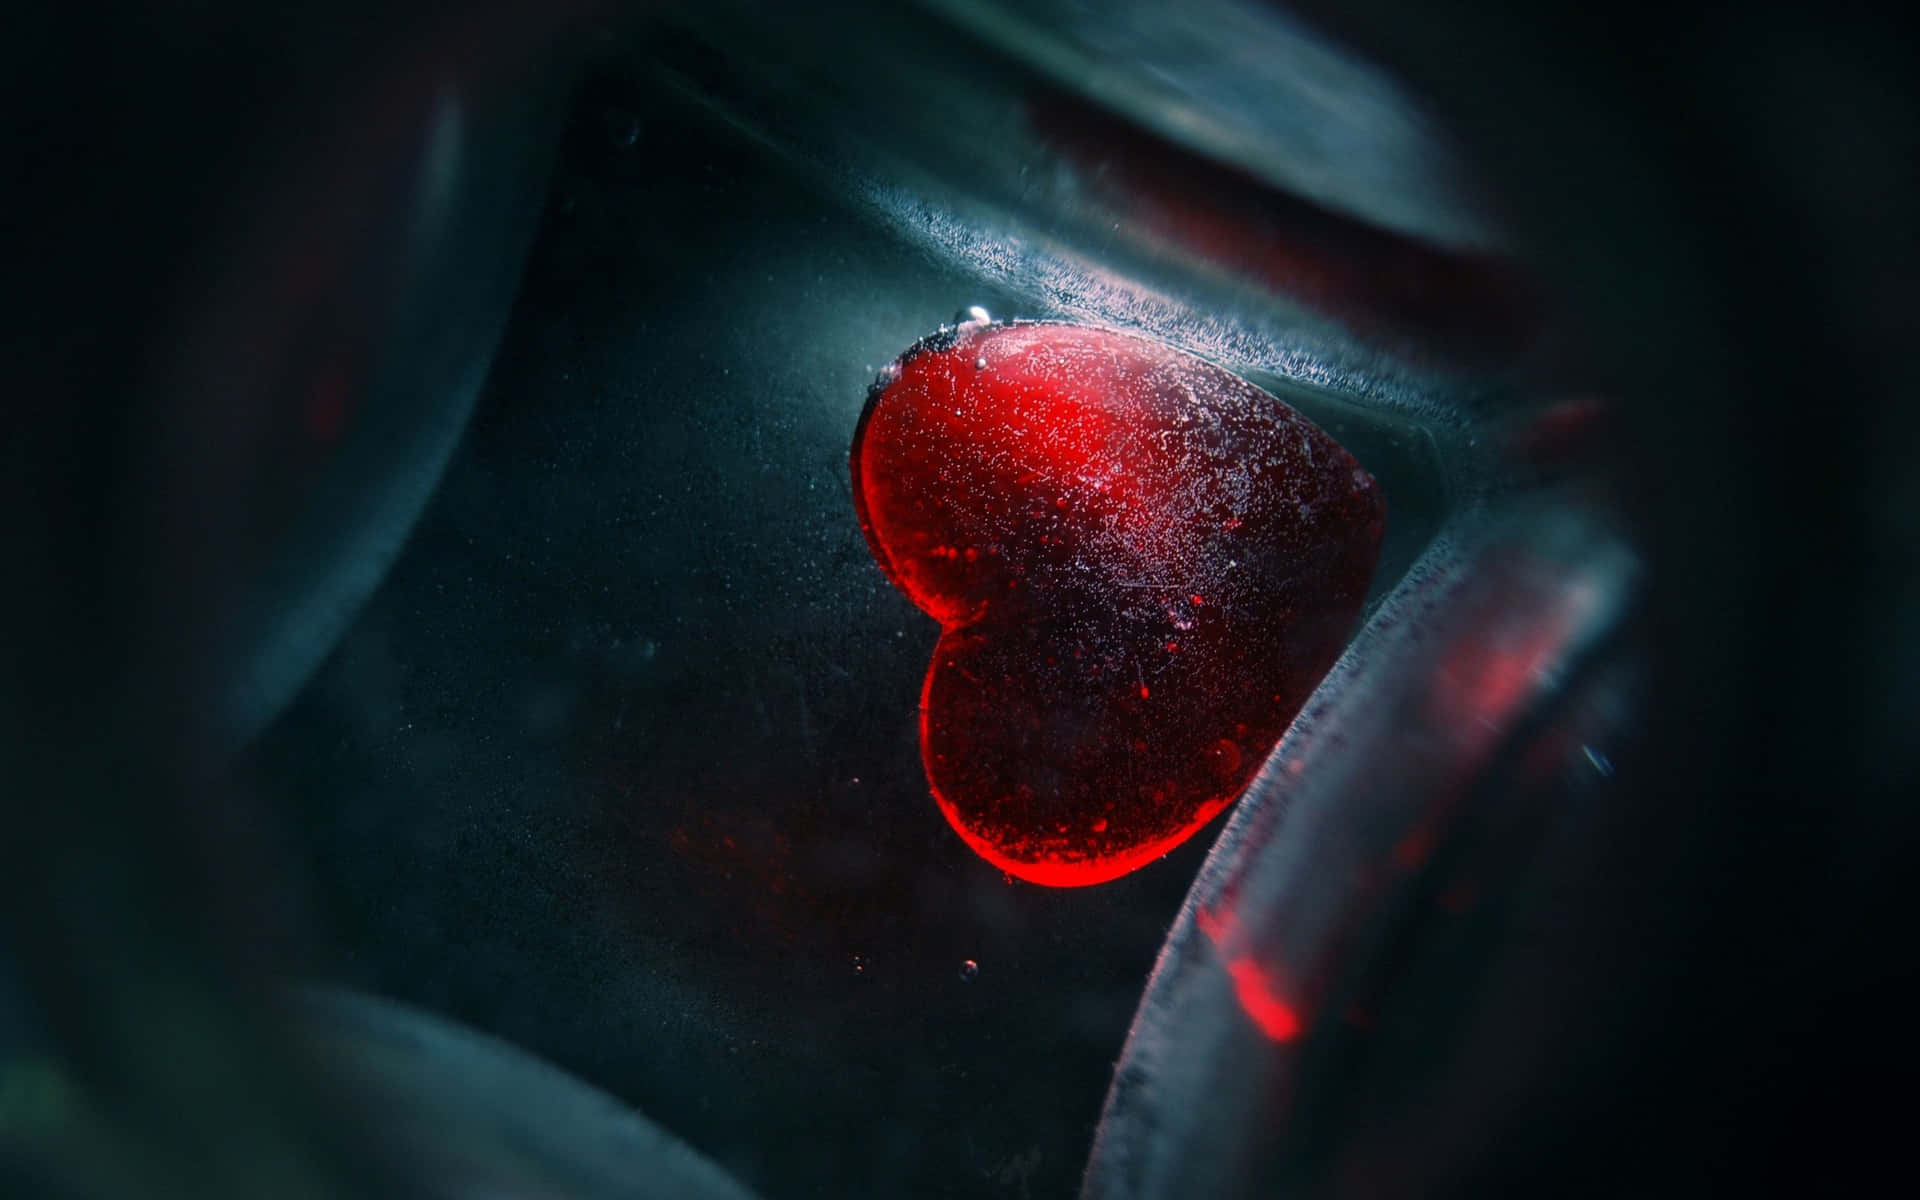 a red heart is shown in a glass bottle